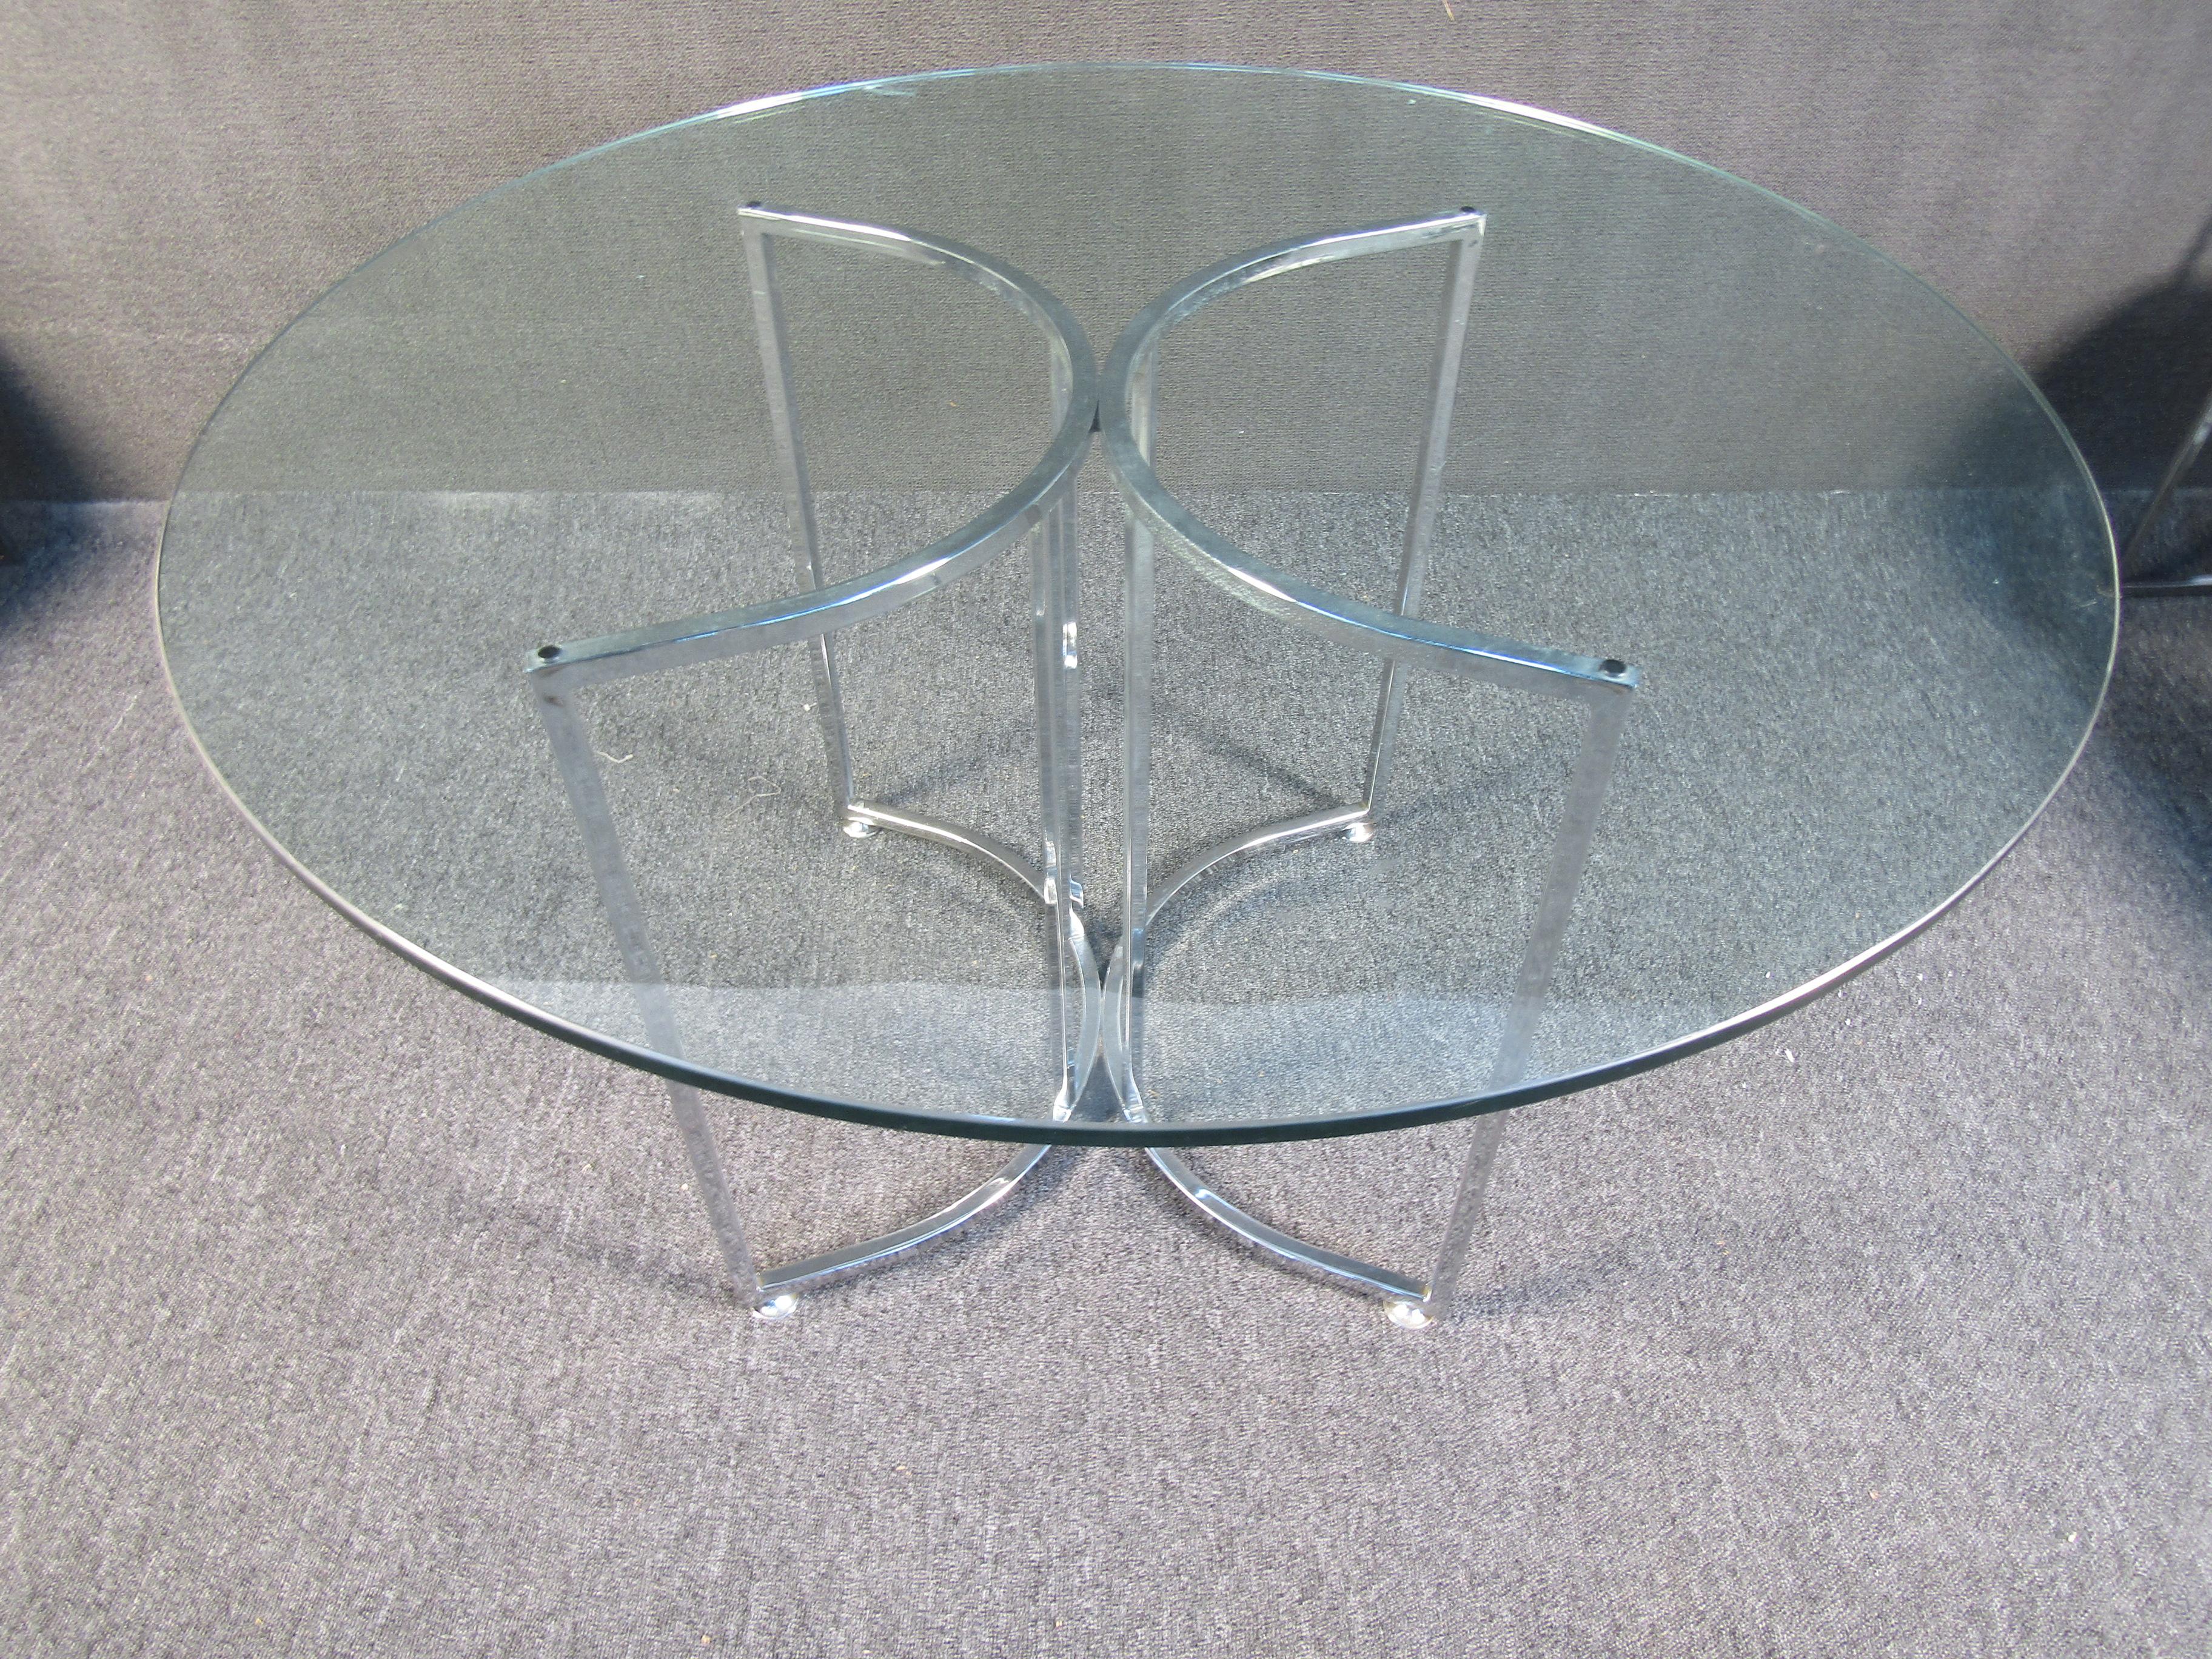 Stylish Mid-Century Modern dining set, table with four chairs. Tufted white vinyl upholstery. Chrome frames on the chairs and table. Nice circular piece of glass serves as the tabletop. Please confirm item location with dealer (NJ or NY).